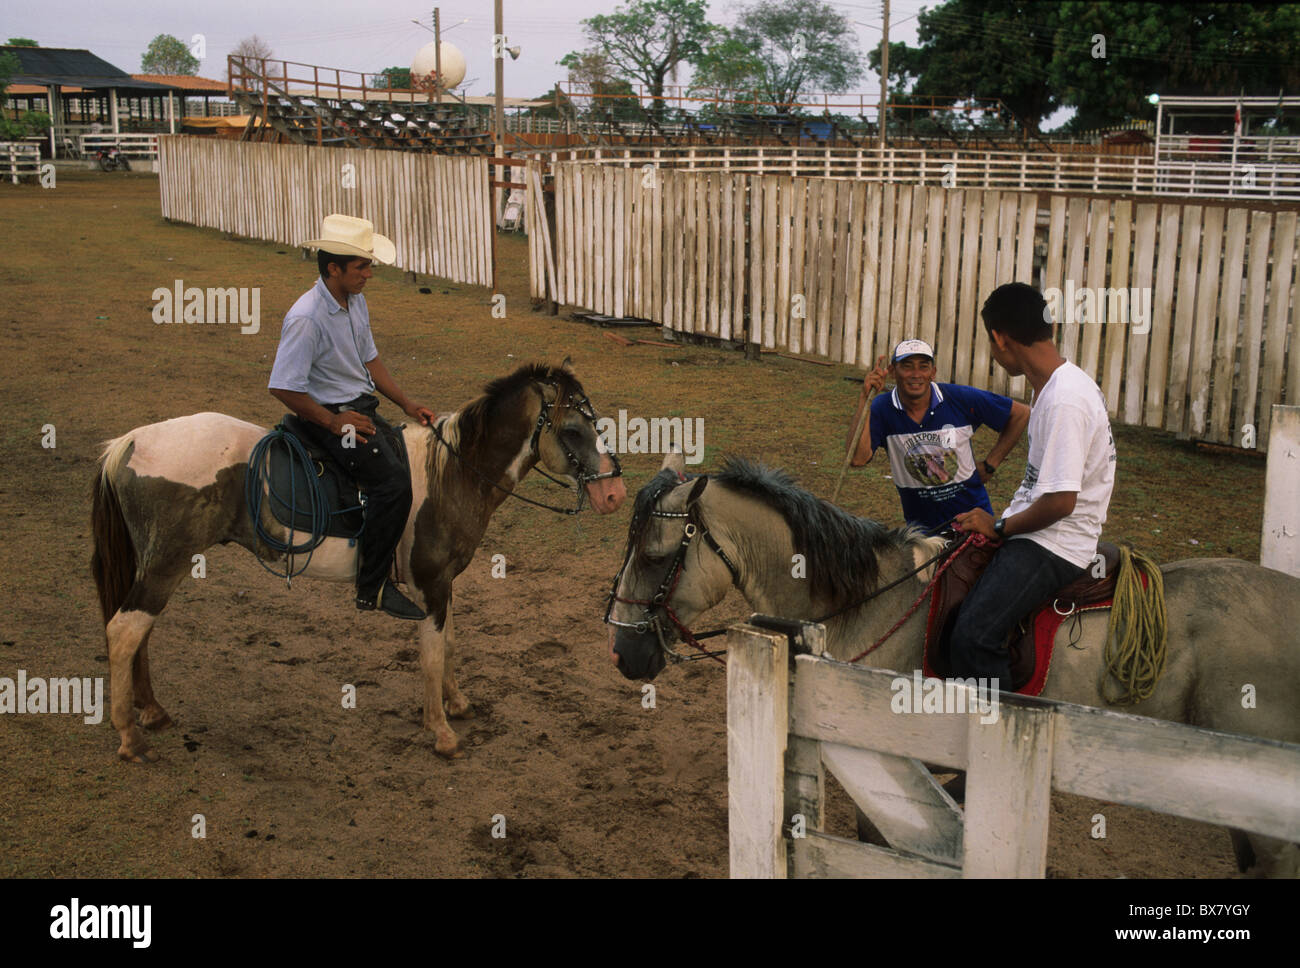 Riders talking on a ranch.ALENQUER State of Pará. BRAZIL (Amazon) Stock Photo